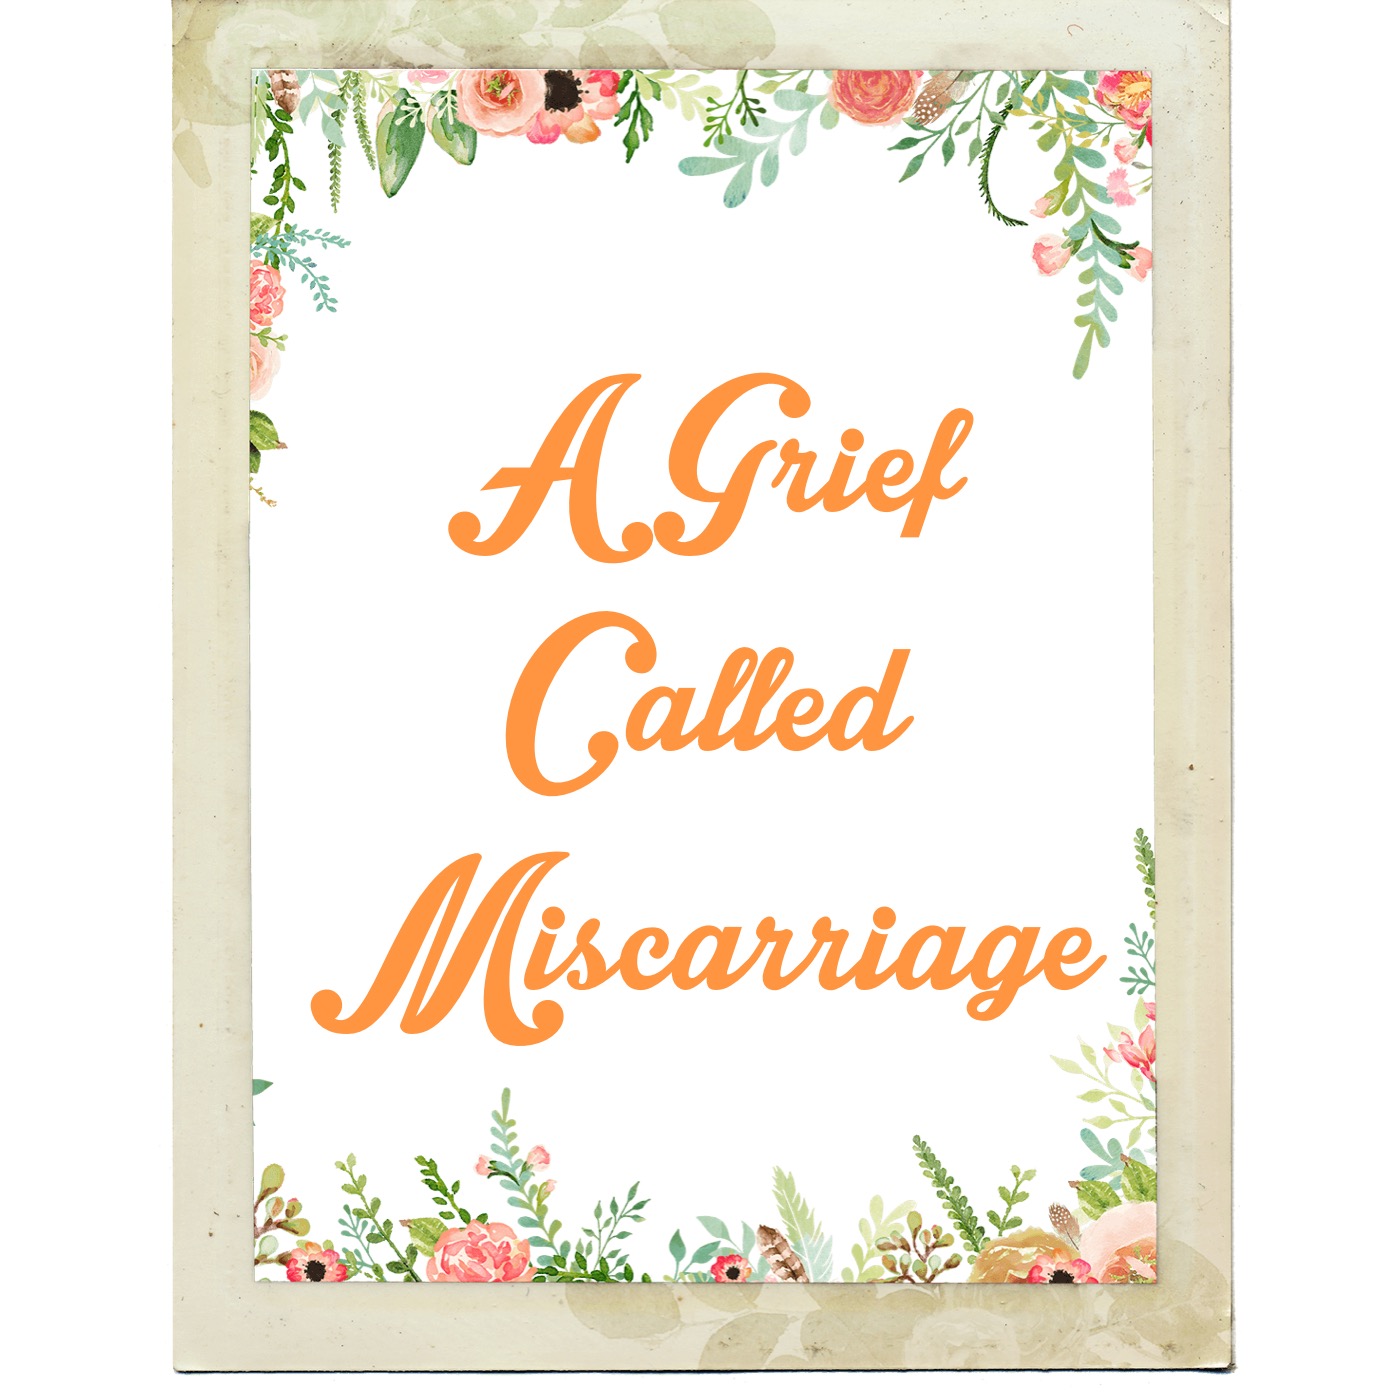 Grieving Through Miscarriage